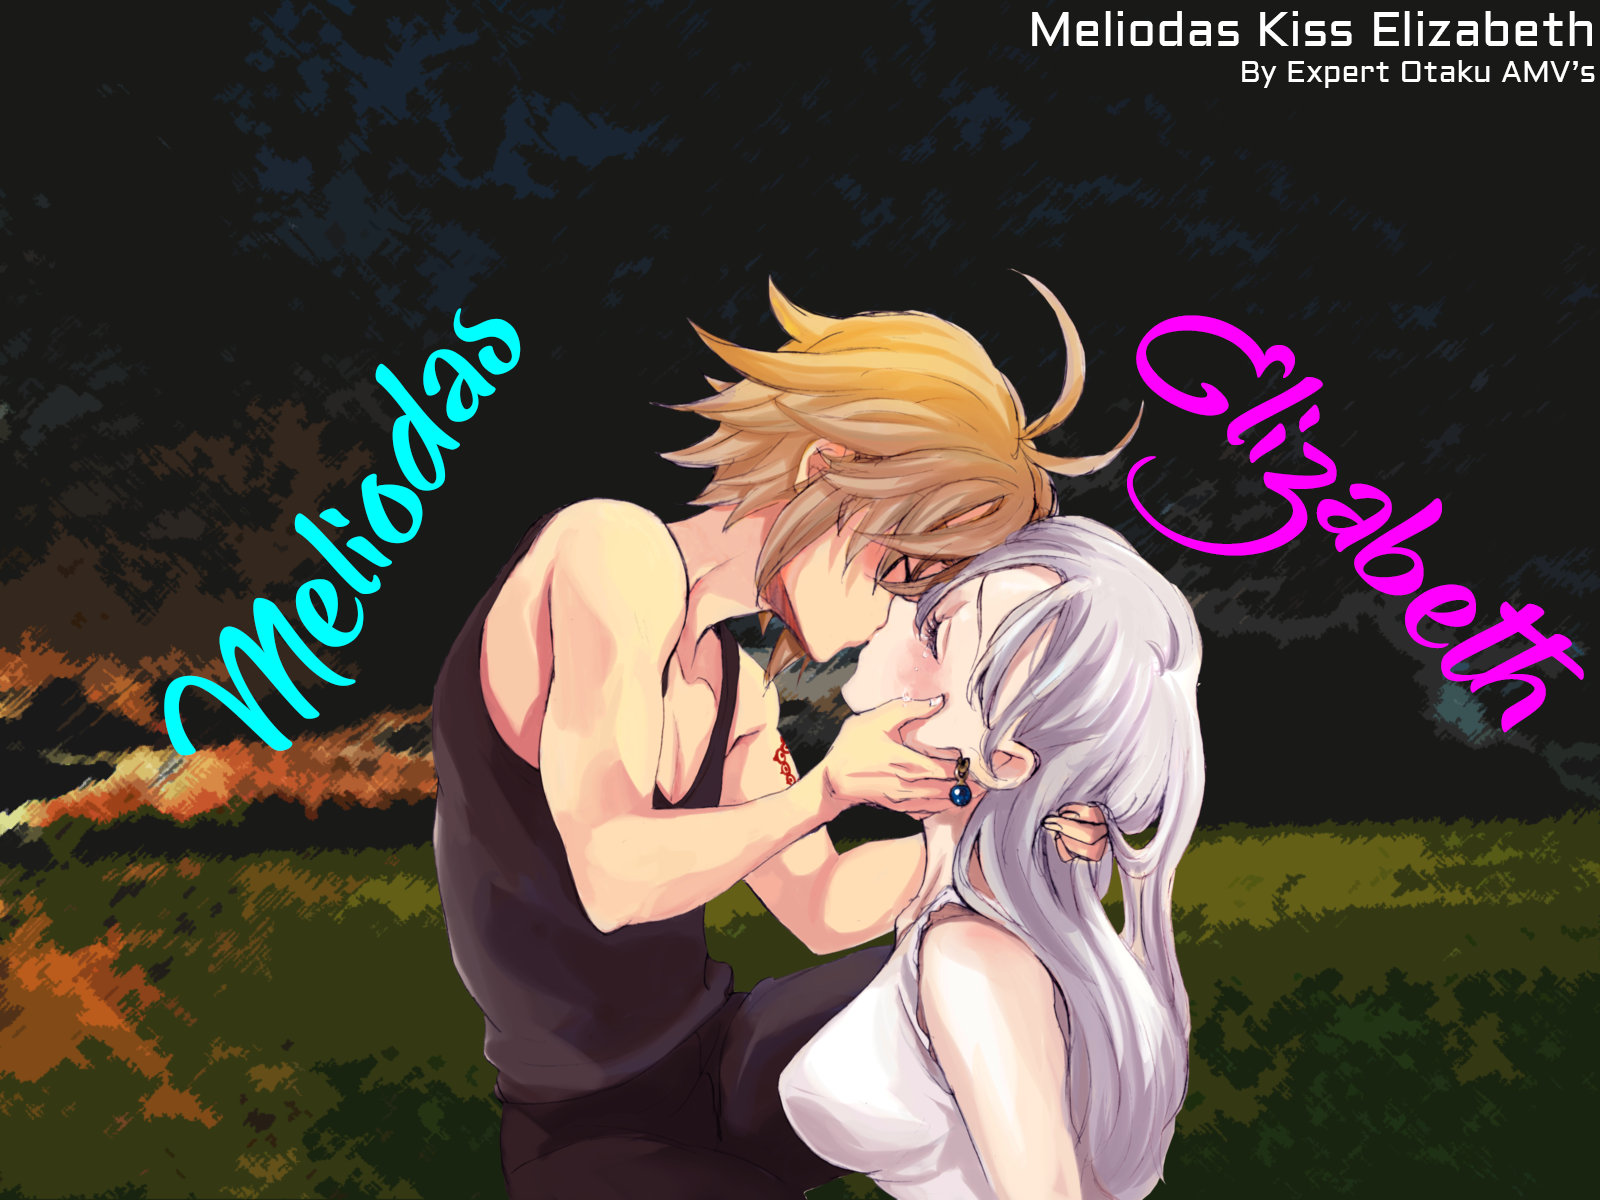 View, Download, Rate, and Comment on this Meliodas Kiss Elizabeth Art. 